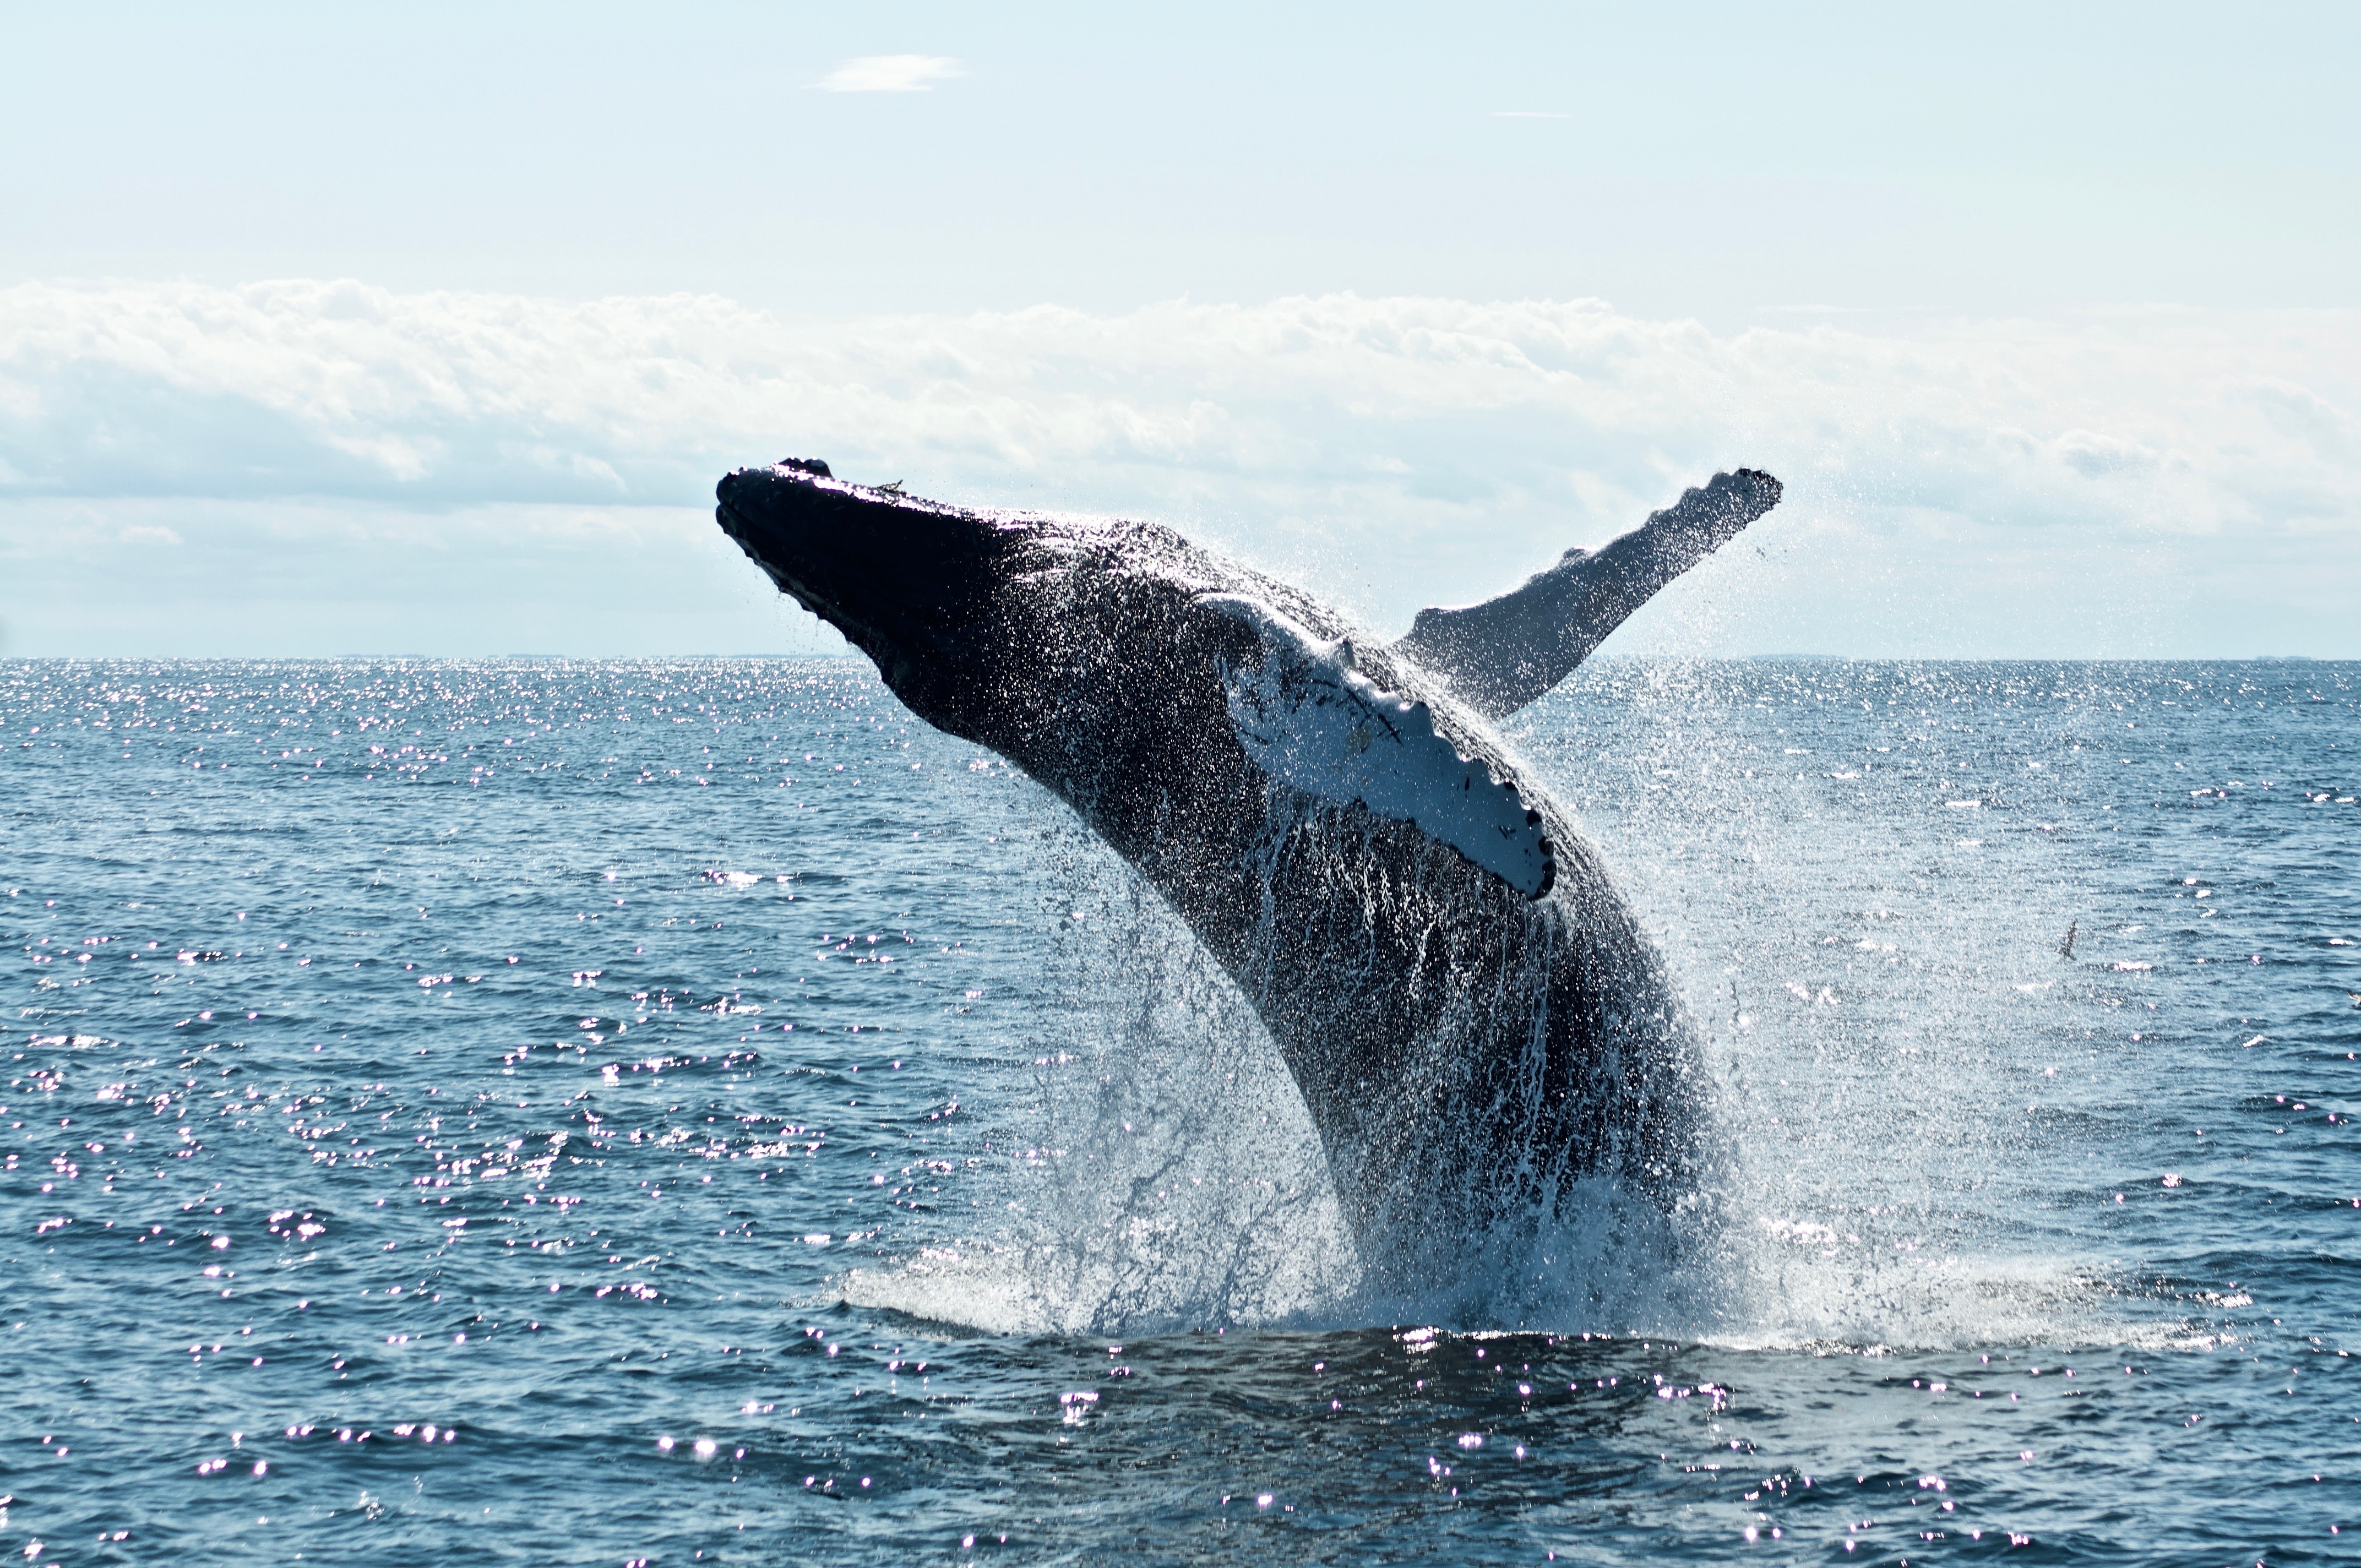 A Humpback Whale breaching out of the water in Samana Bay in the Dominican Republic